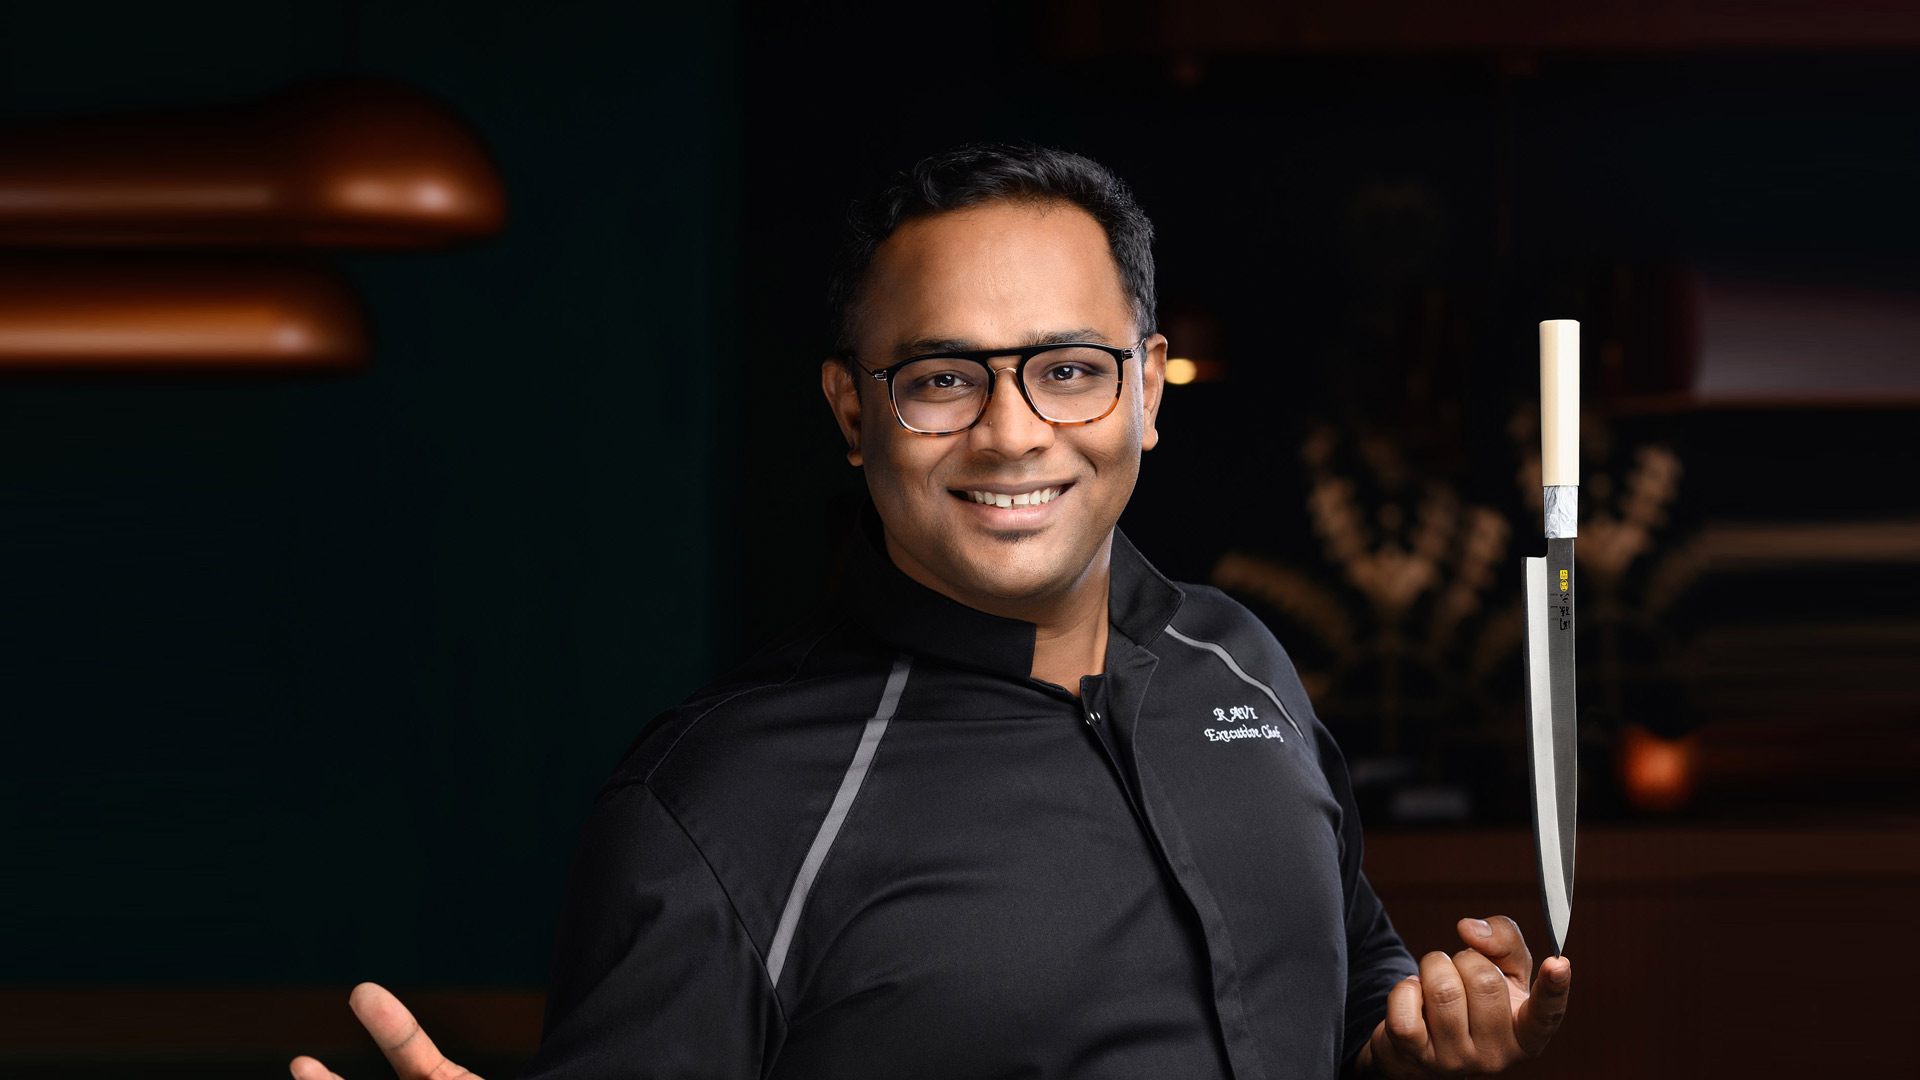 Centara West Bay appoints new executive chef